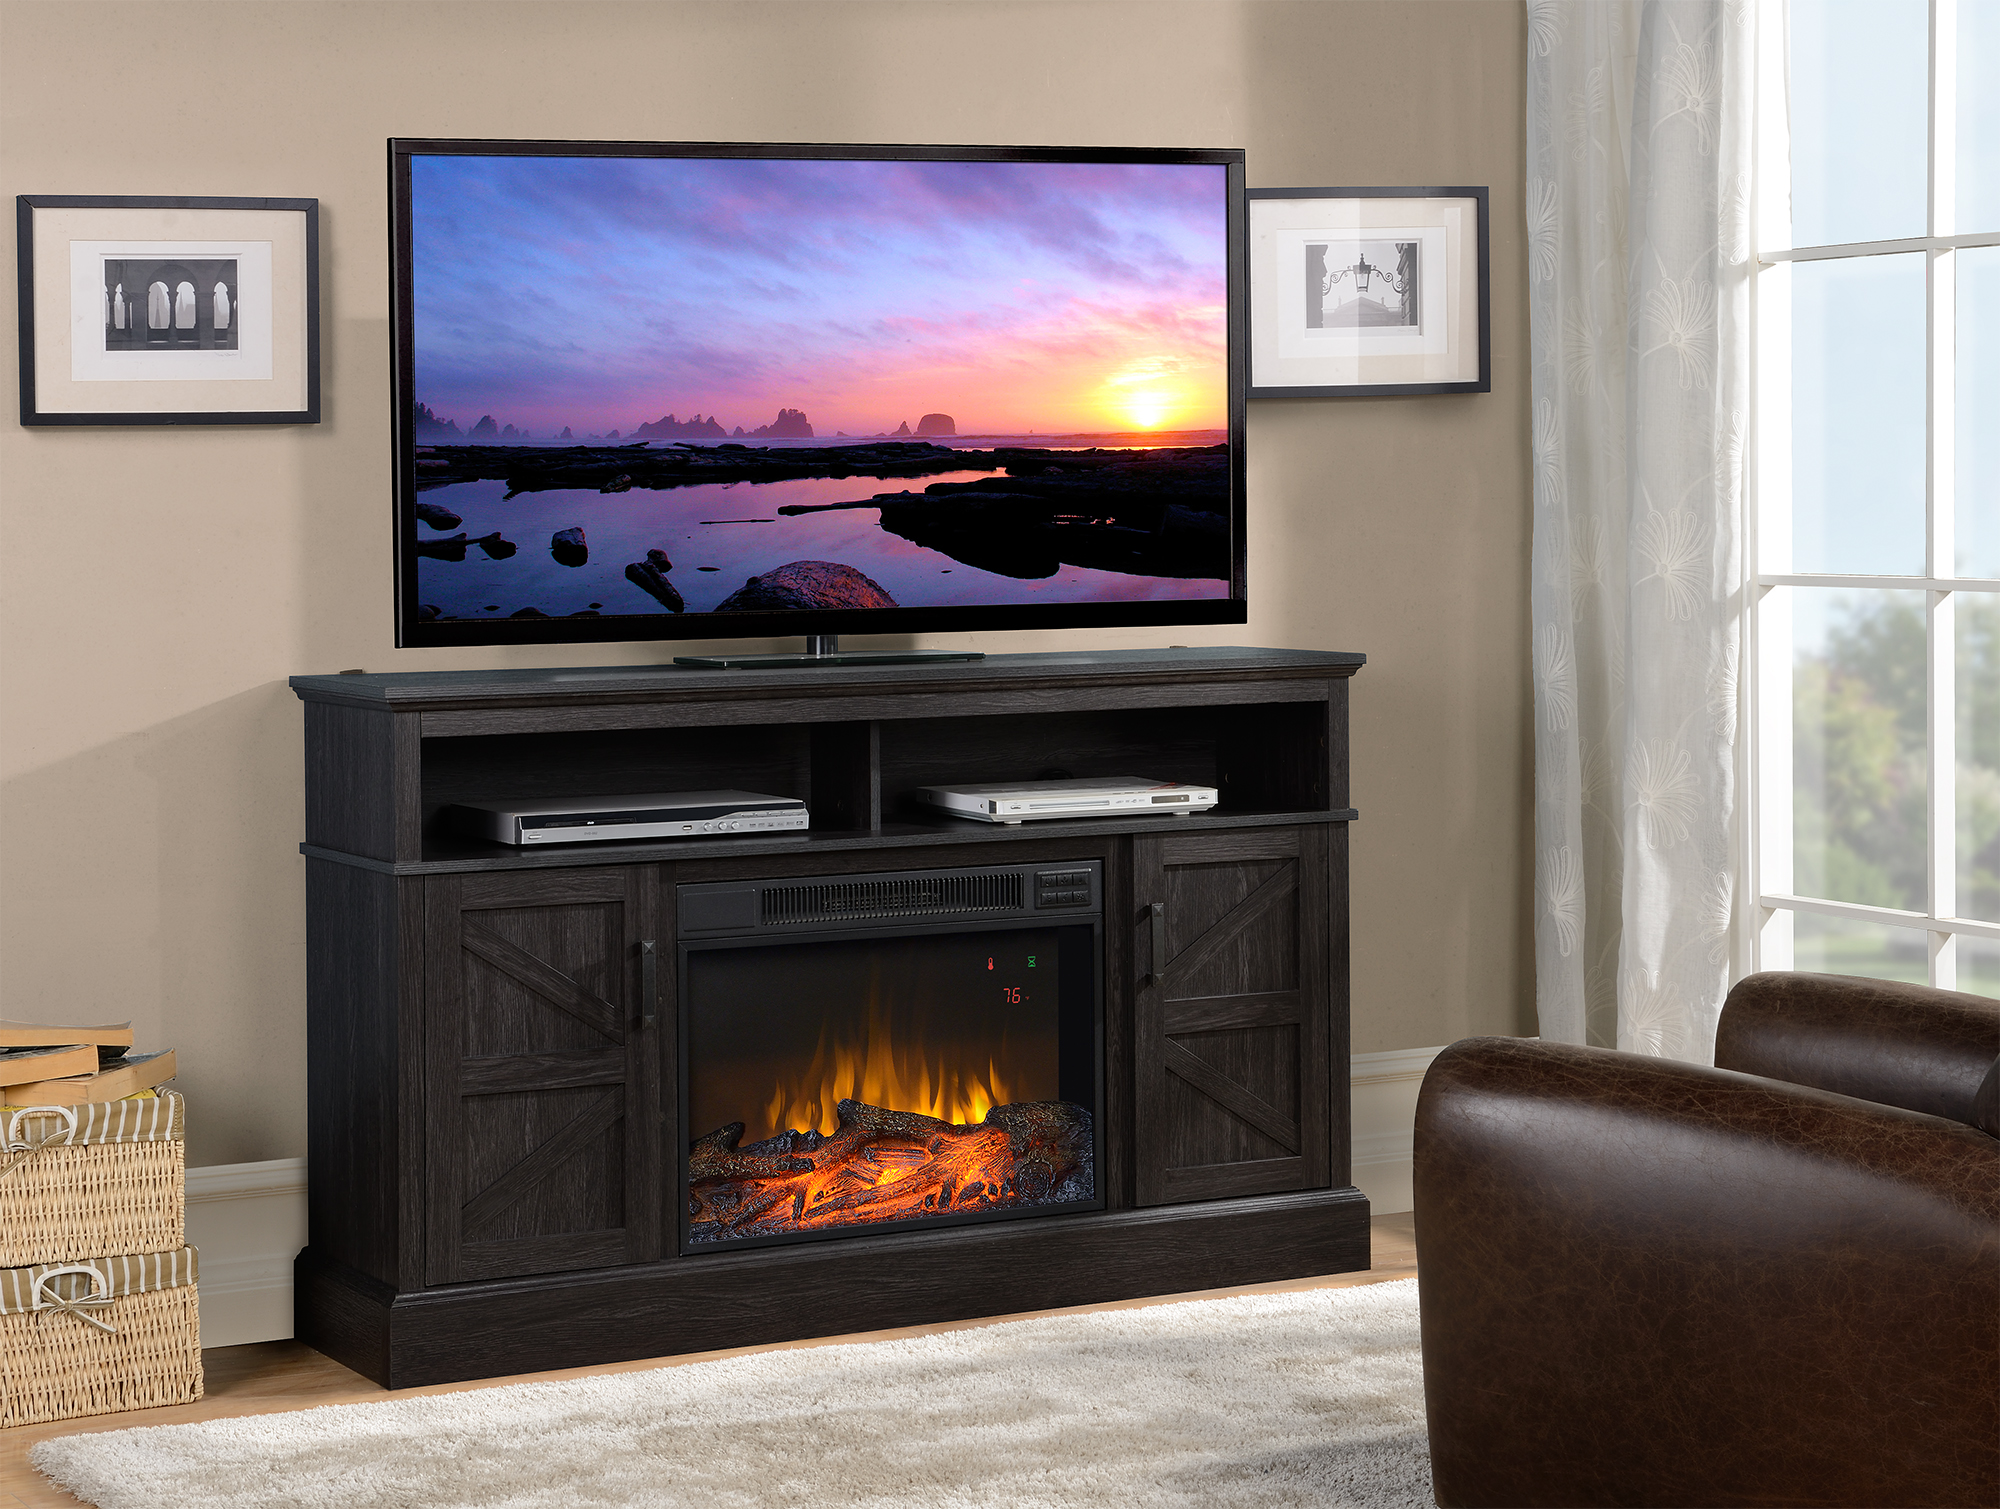 Oak Fireplace Tv Stand Unique Flamelux aspen 60 In Media Fireplace and Tv Stand In Gambrel Weathered Oak